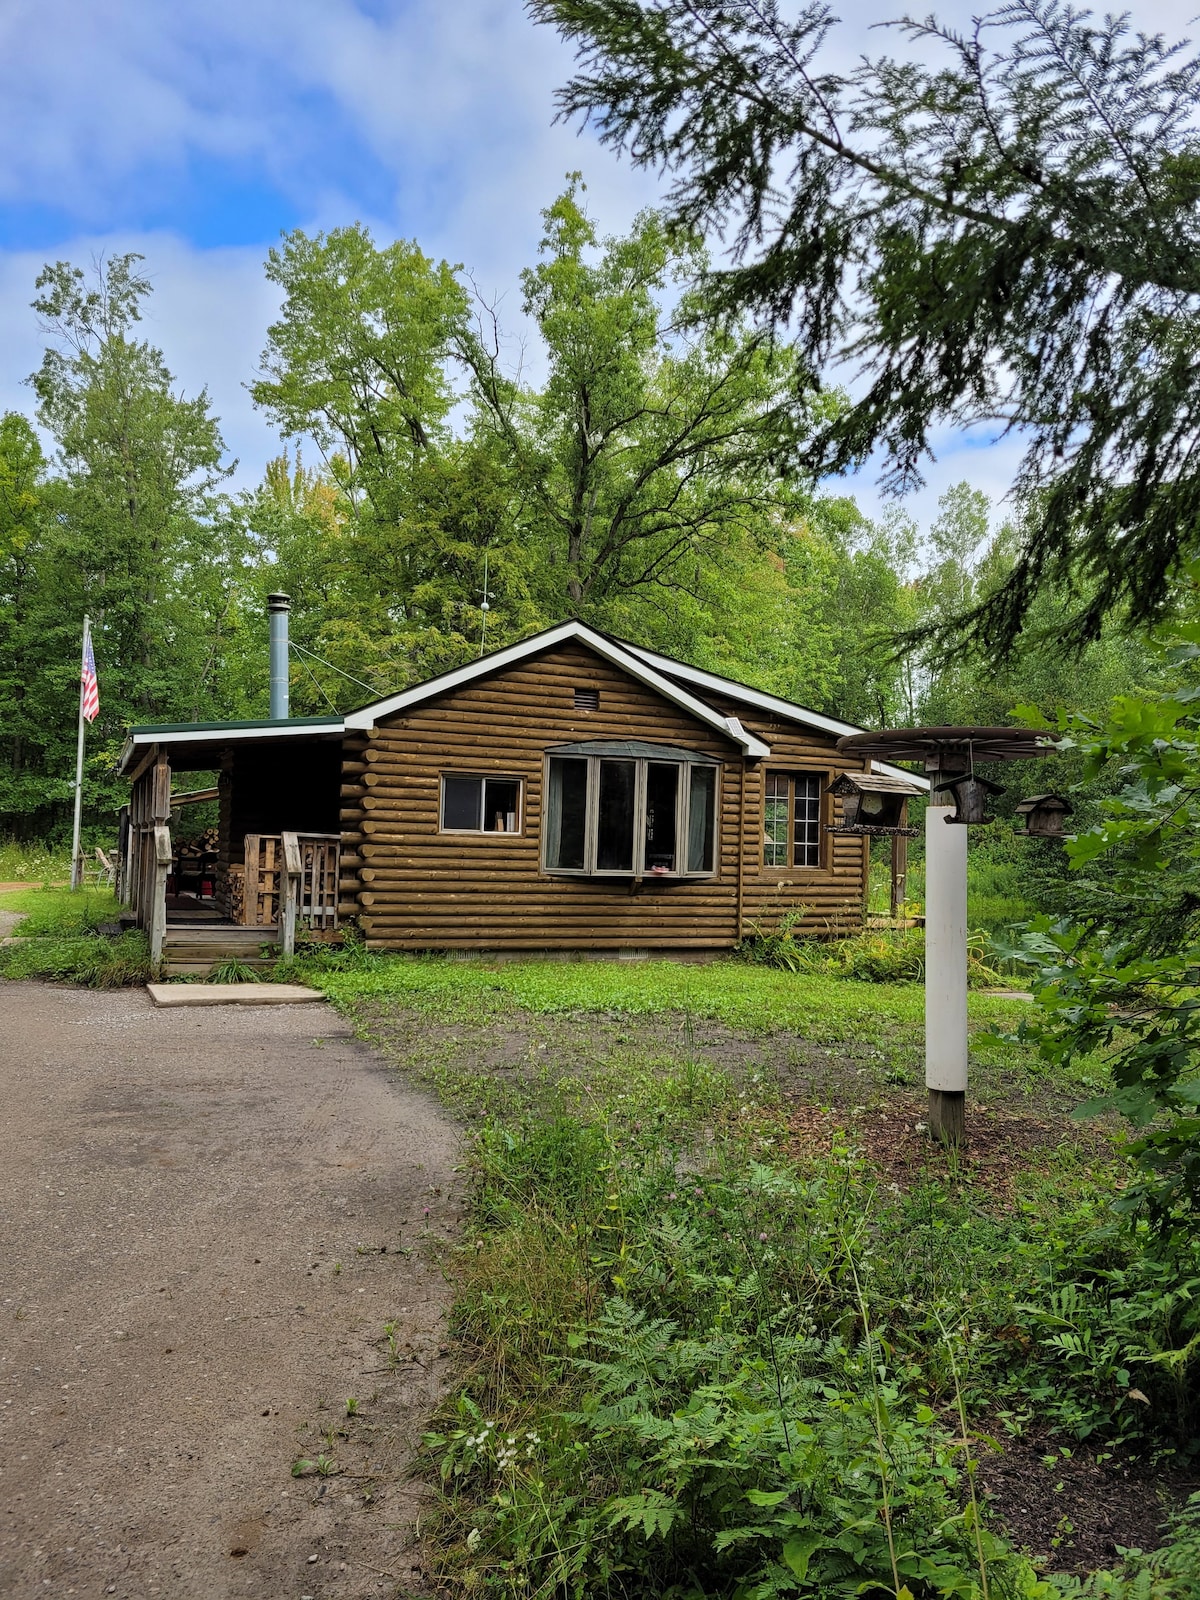 Remote, off-grid cabin w/pond on 120 acres + goats